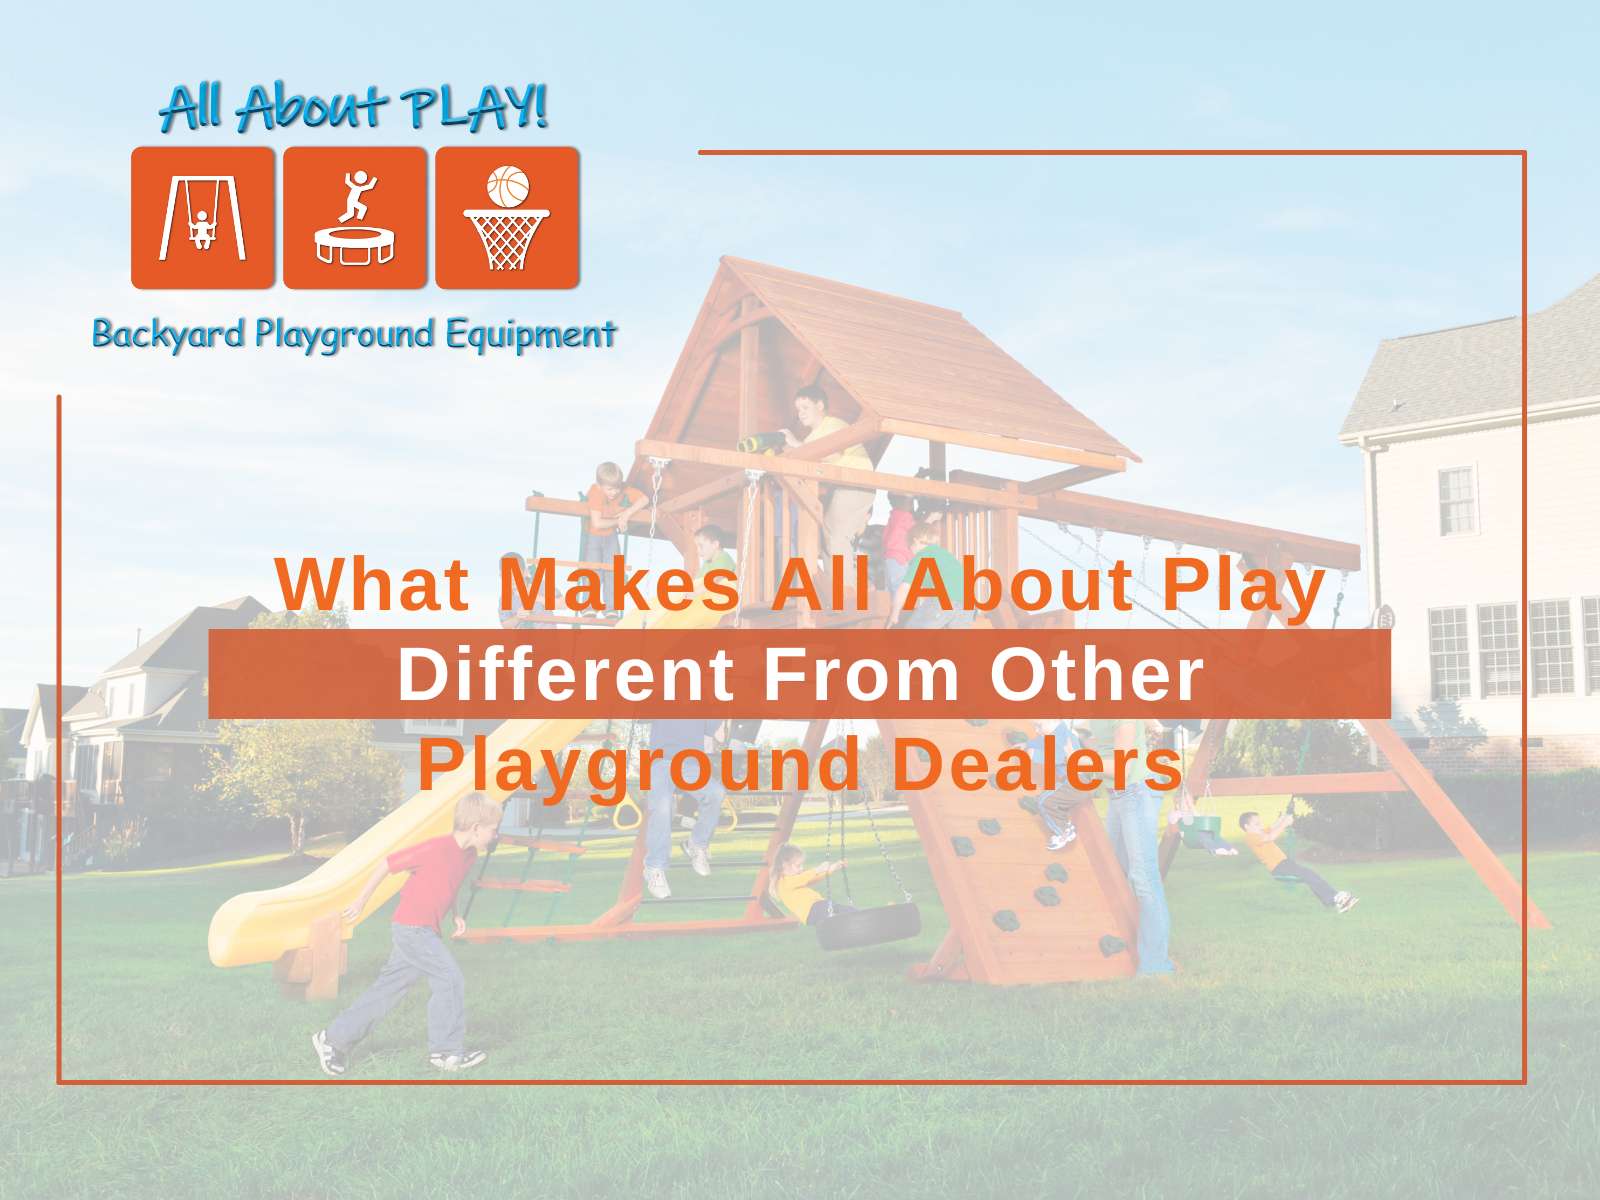 What Makes All About Play Different From Other Playground Dealers